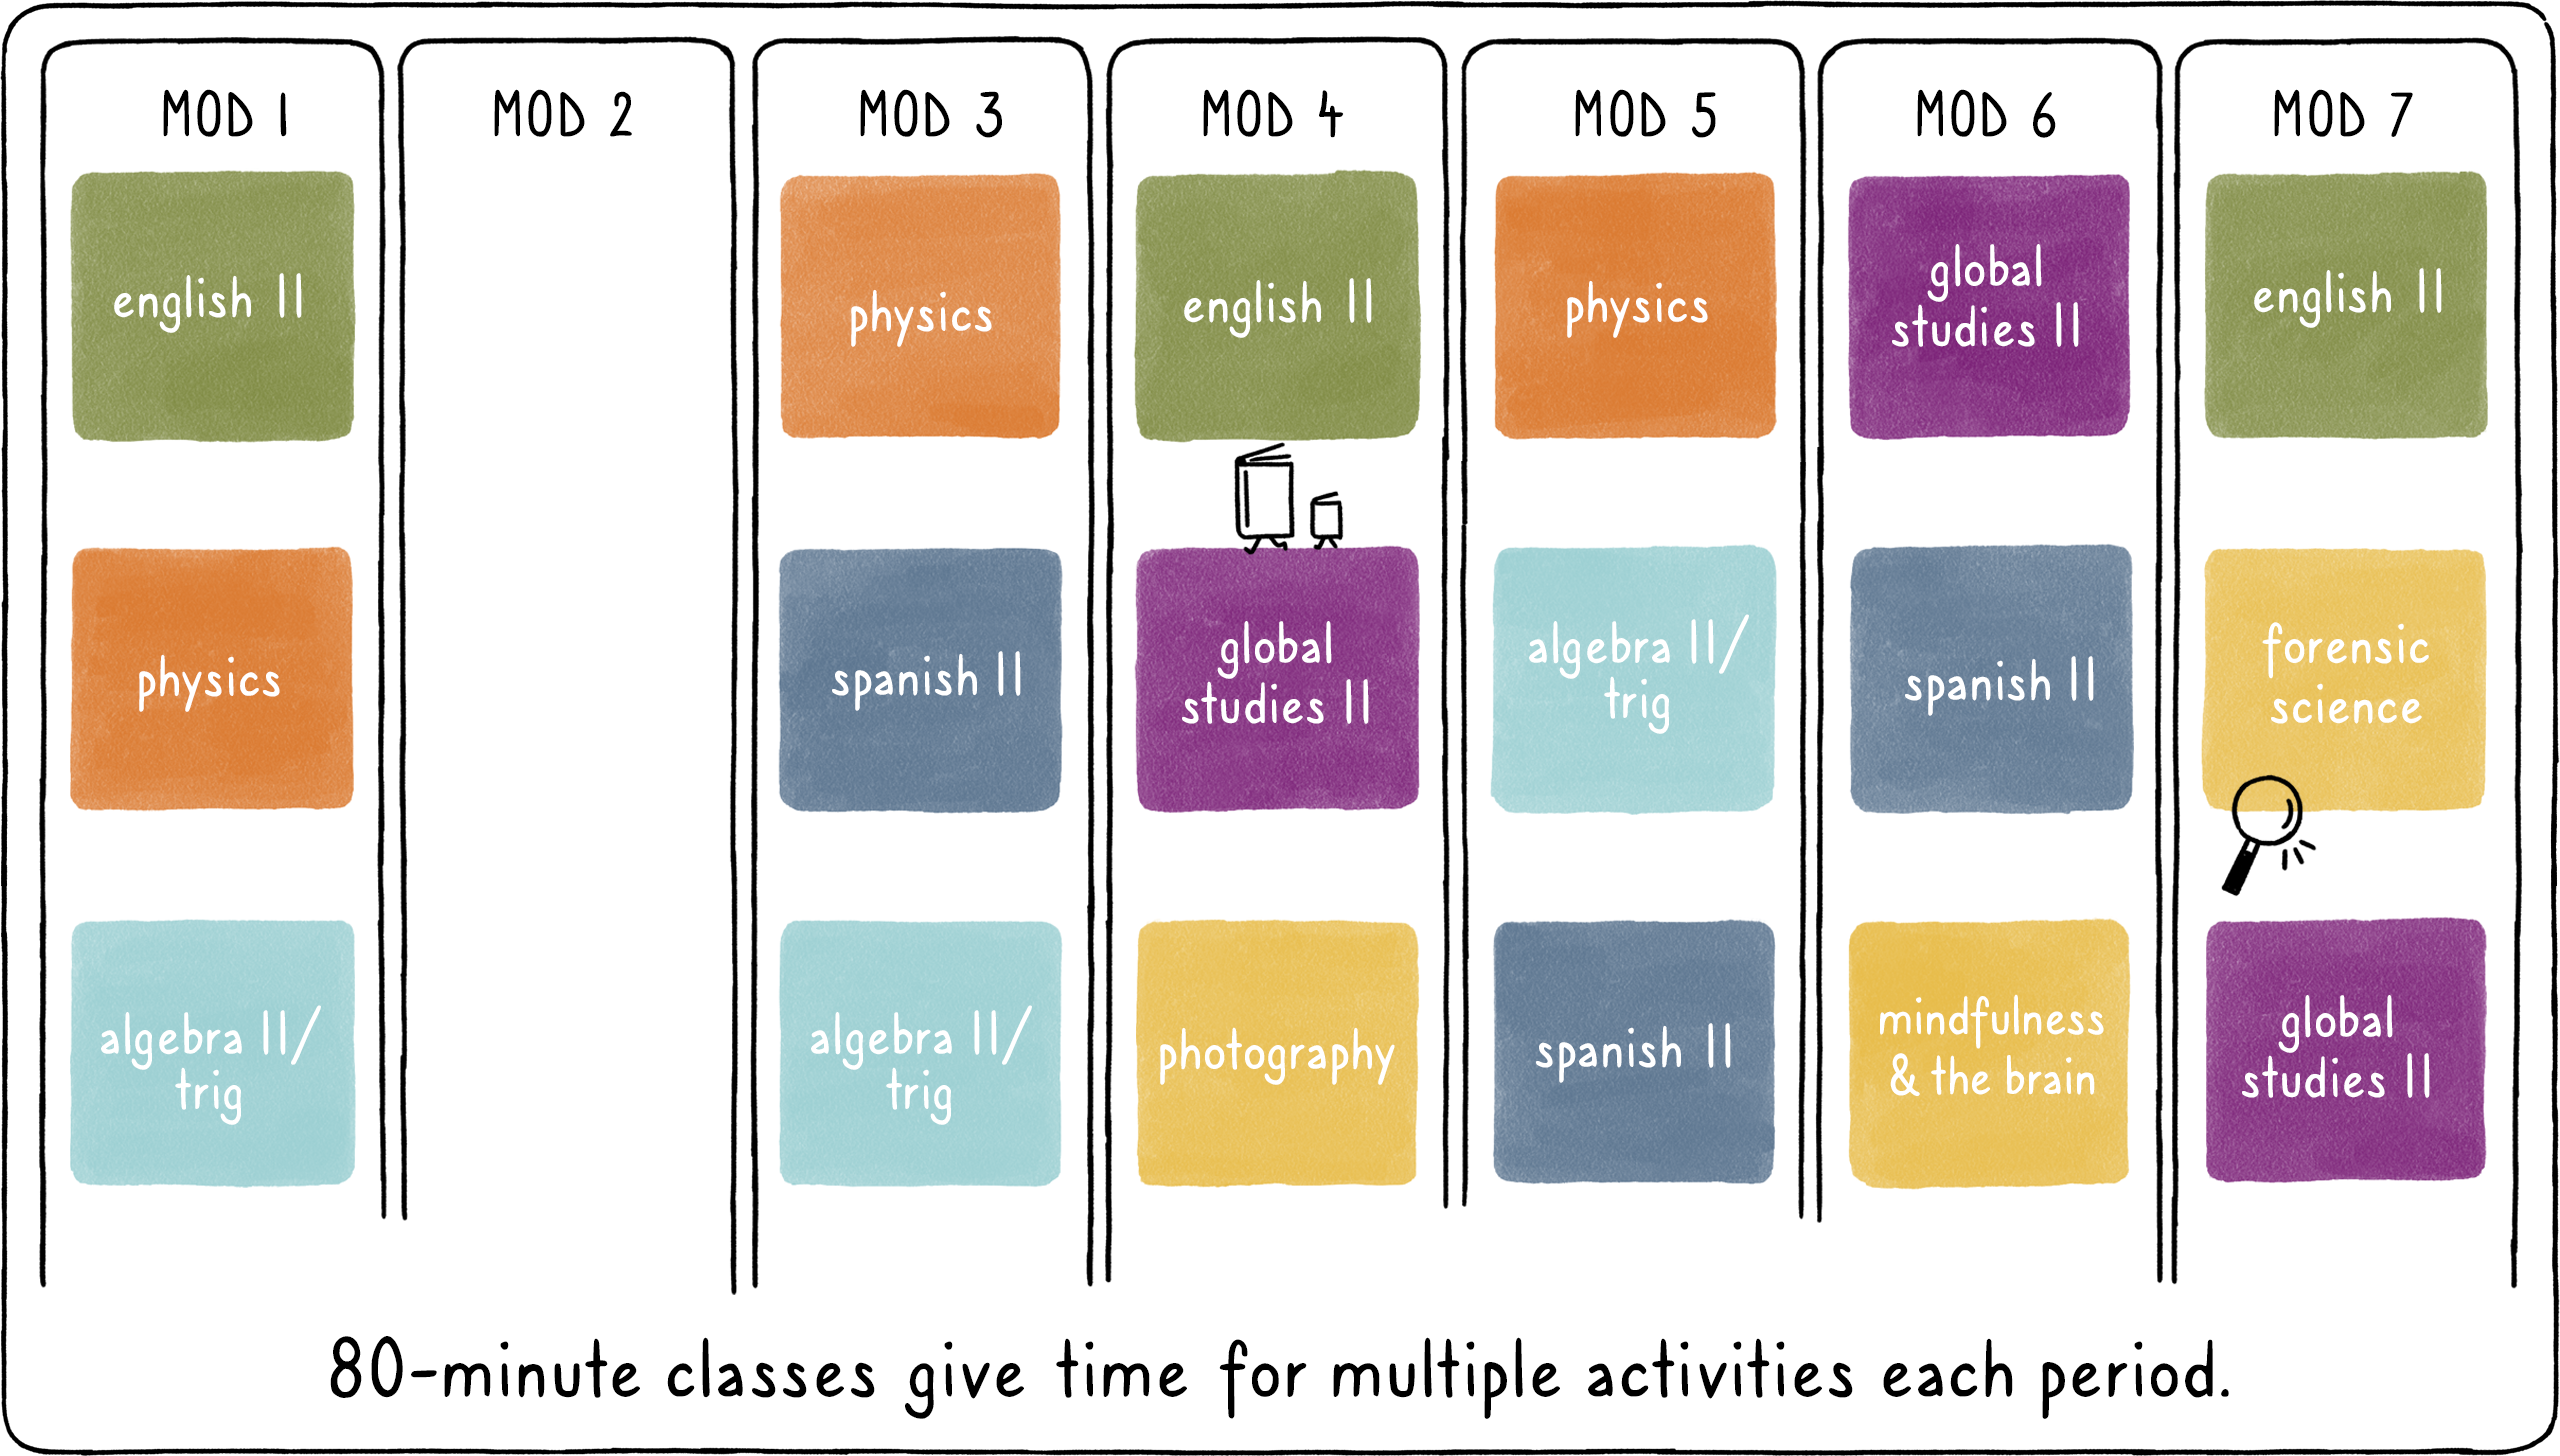 illustration of a mod schedule